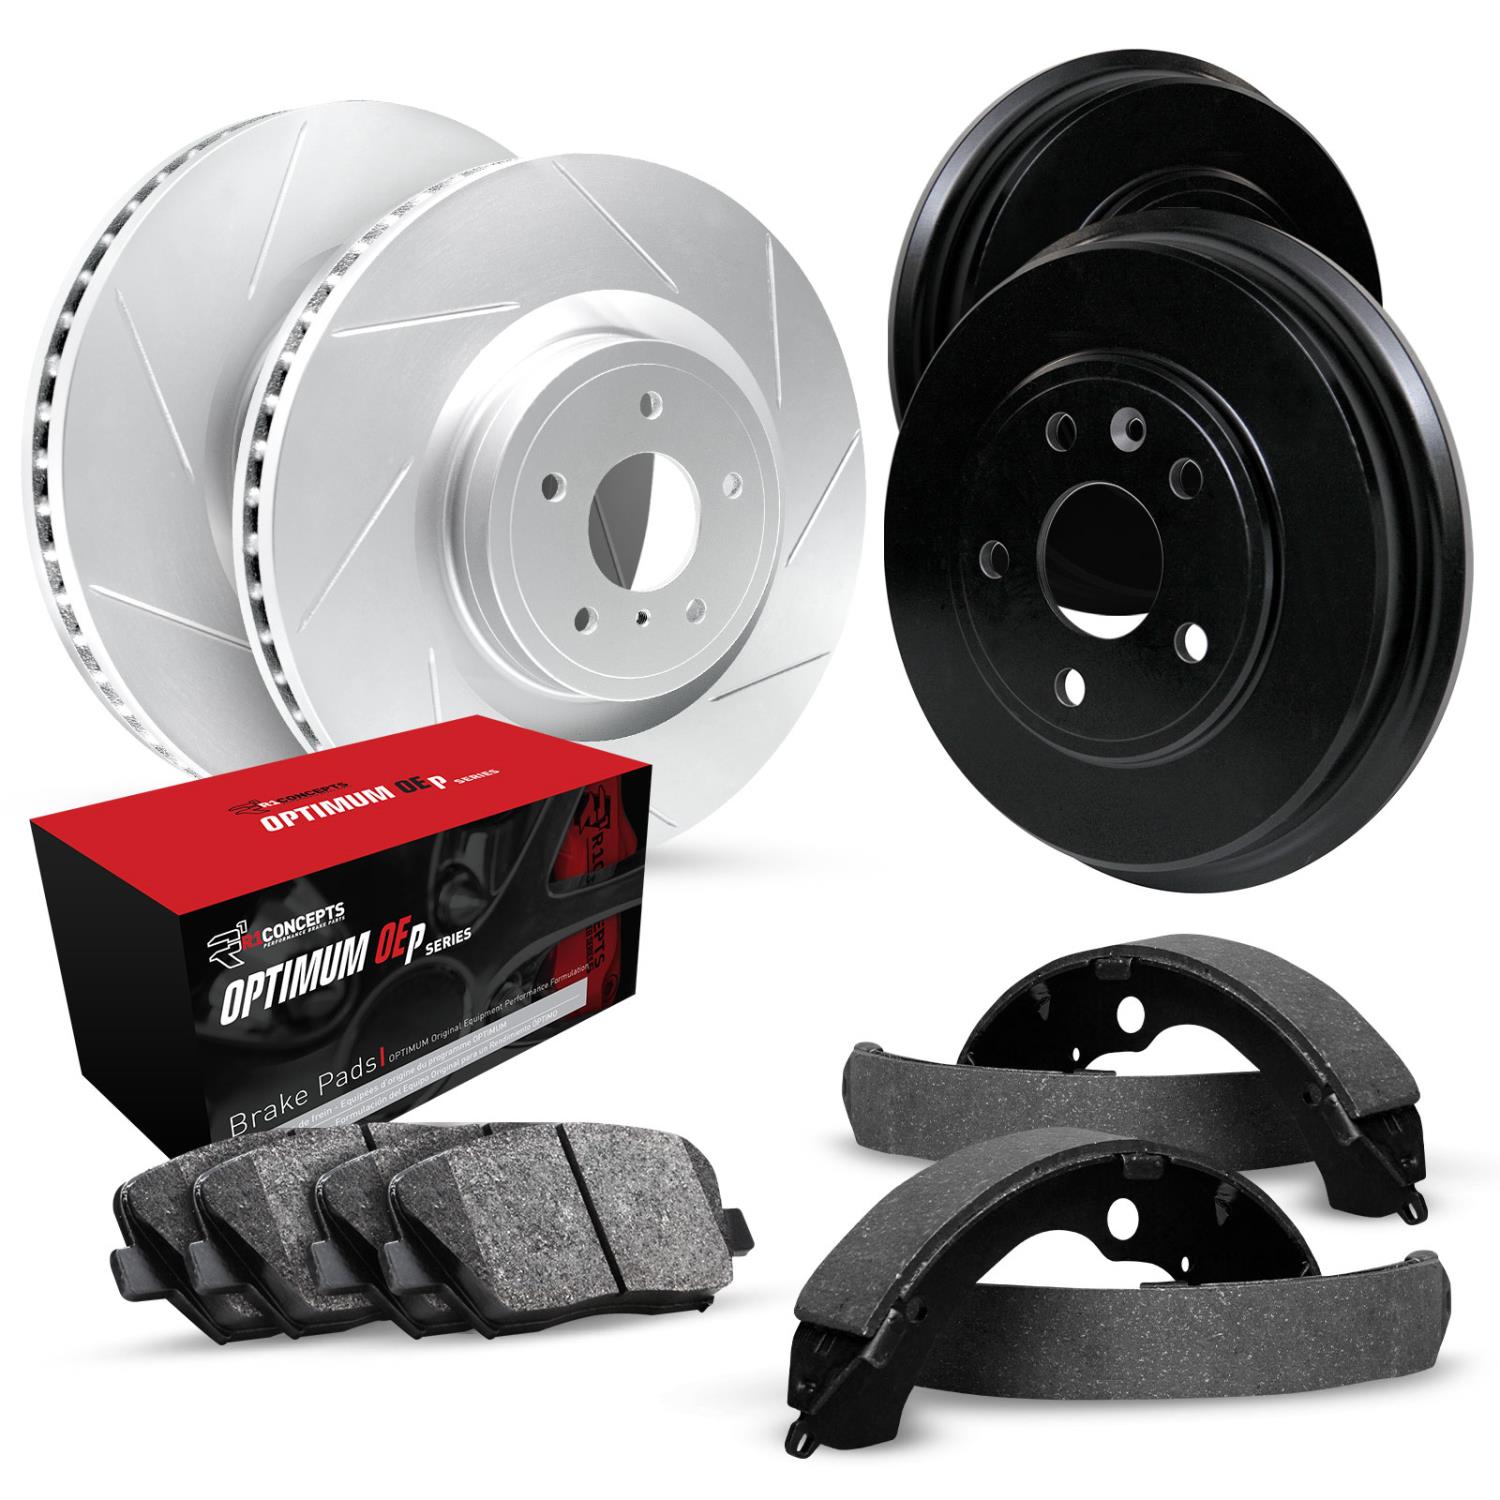 GEO-Carbon Slotted Brake Rotor & Drum Set w/Optimum OE Pads & Shoes, 2000-2003 Lexus/Toyota/Scion, Position: Front & Rear